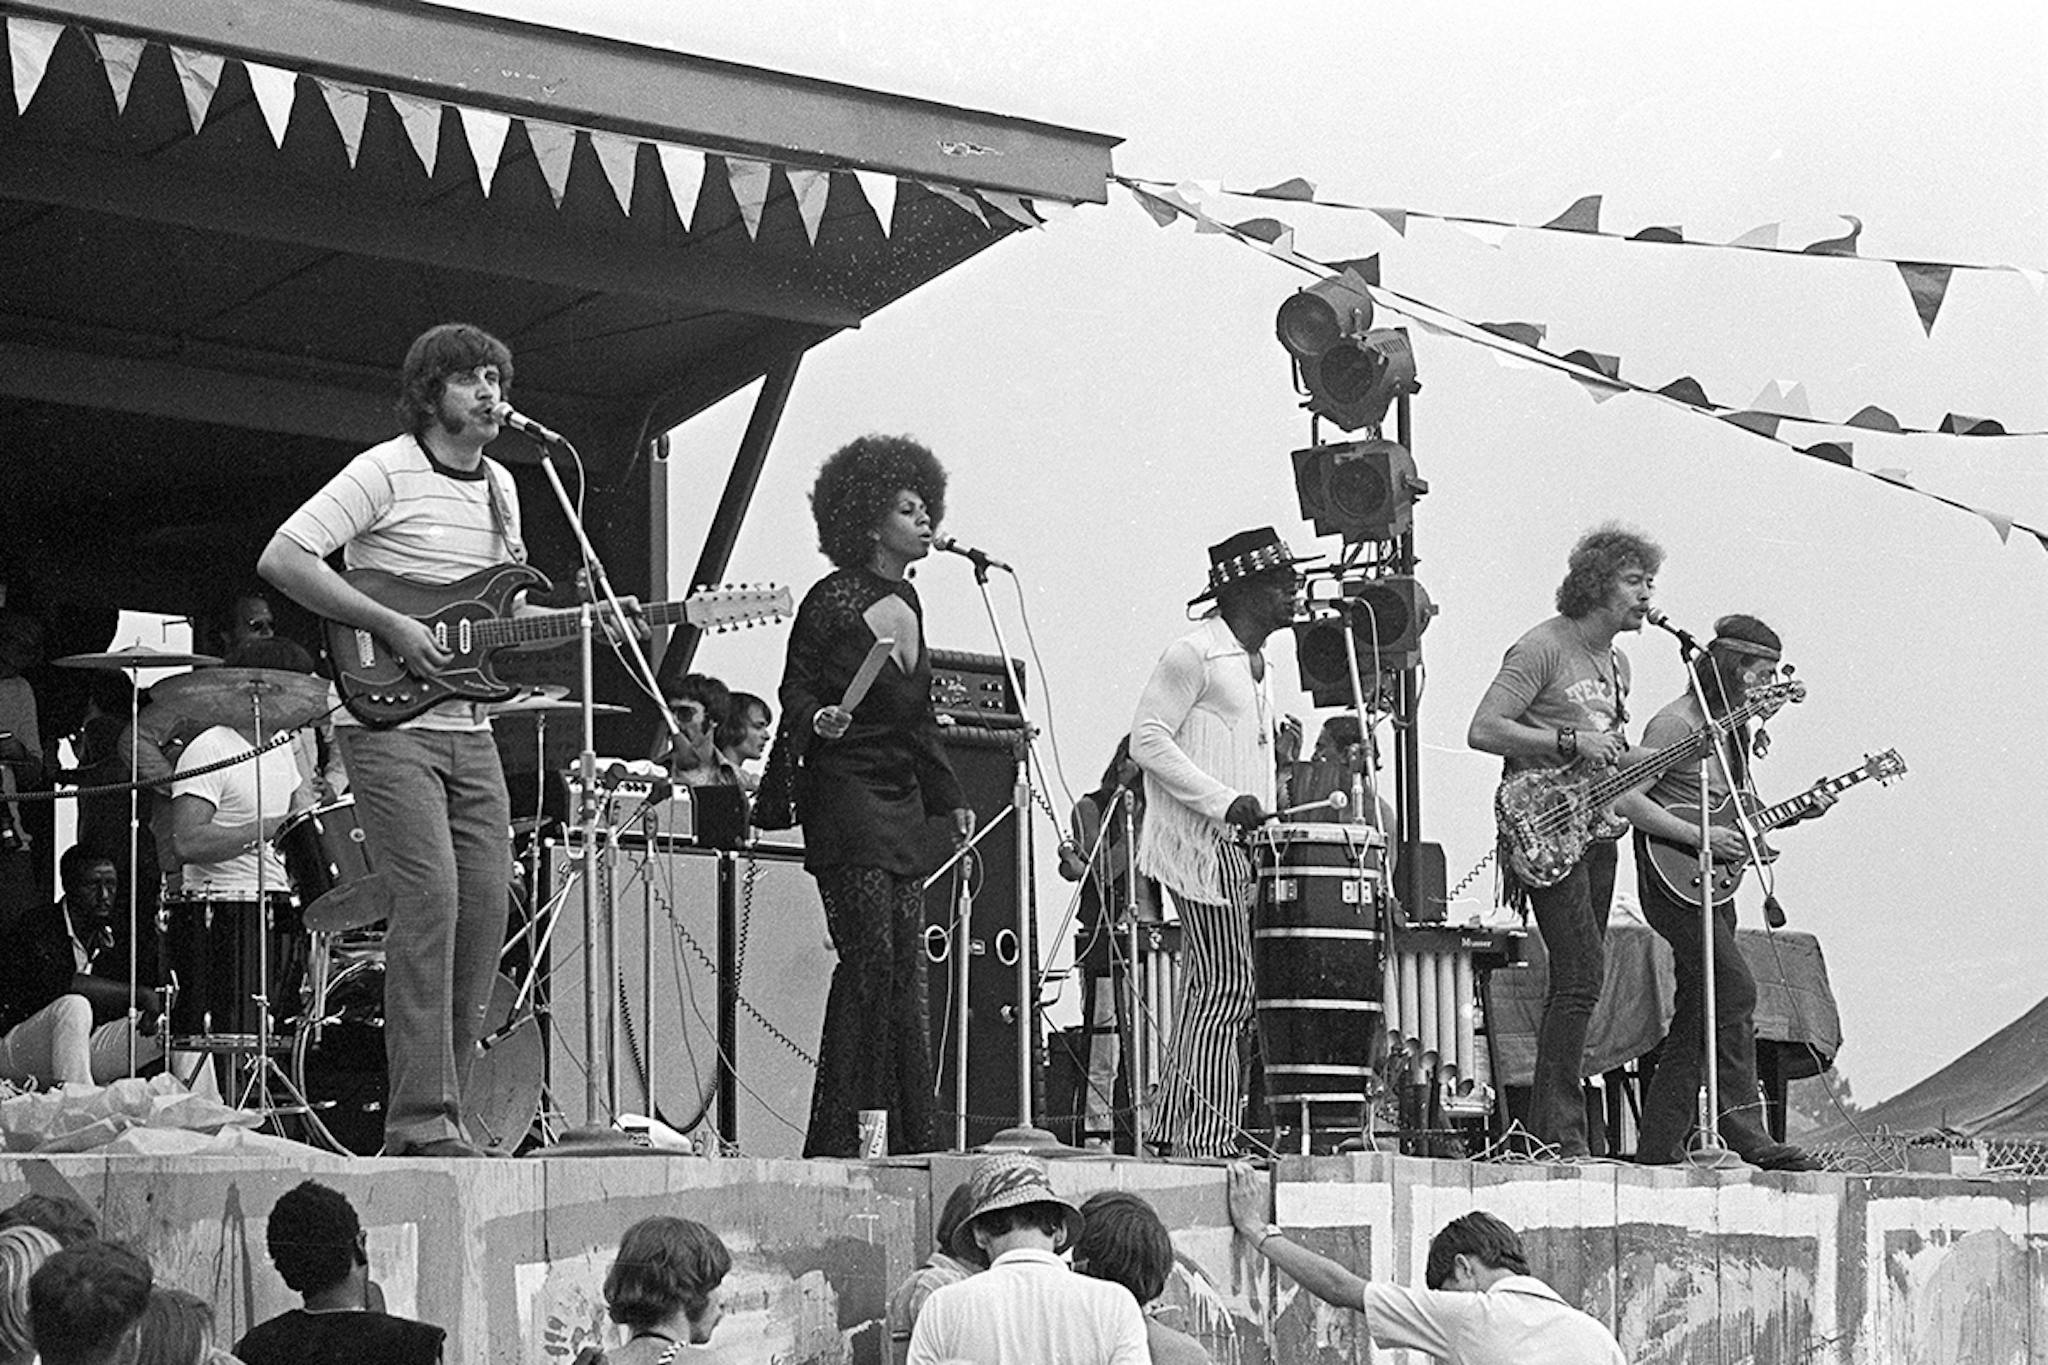 Remembering The Texas International Pop Festival, The Lone Star State's